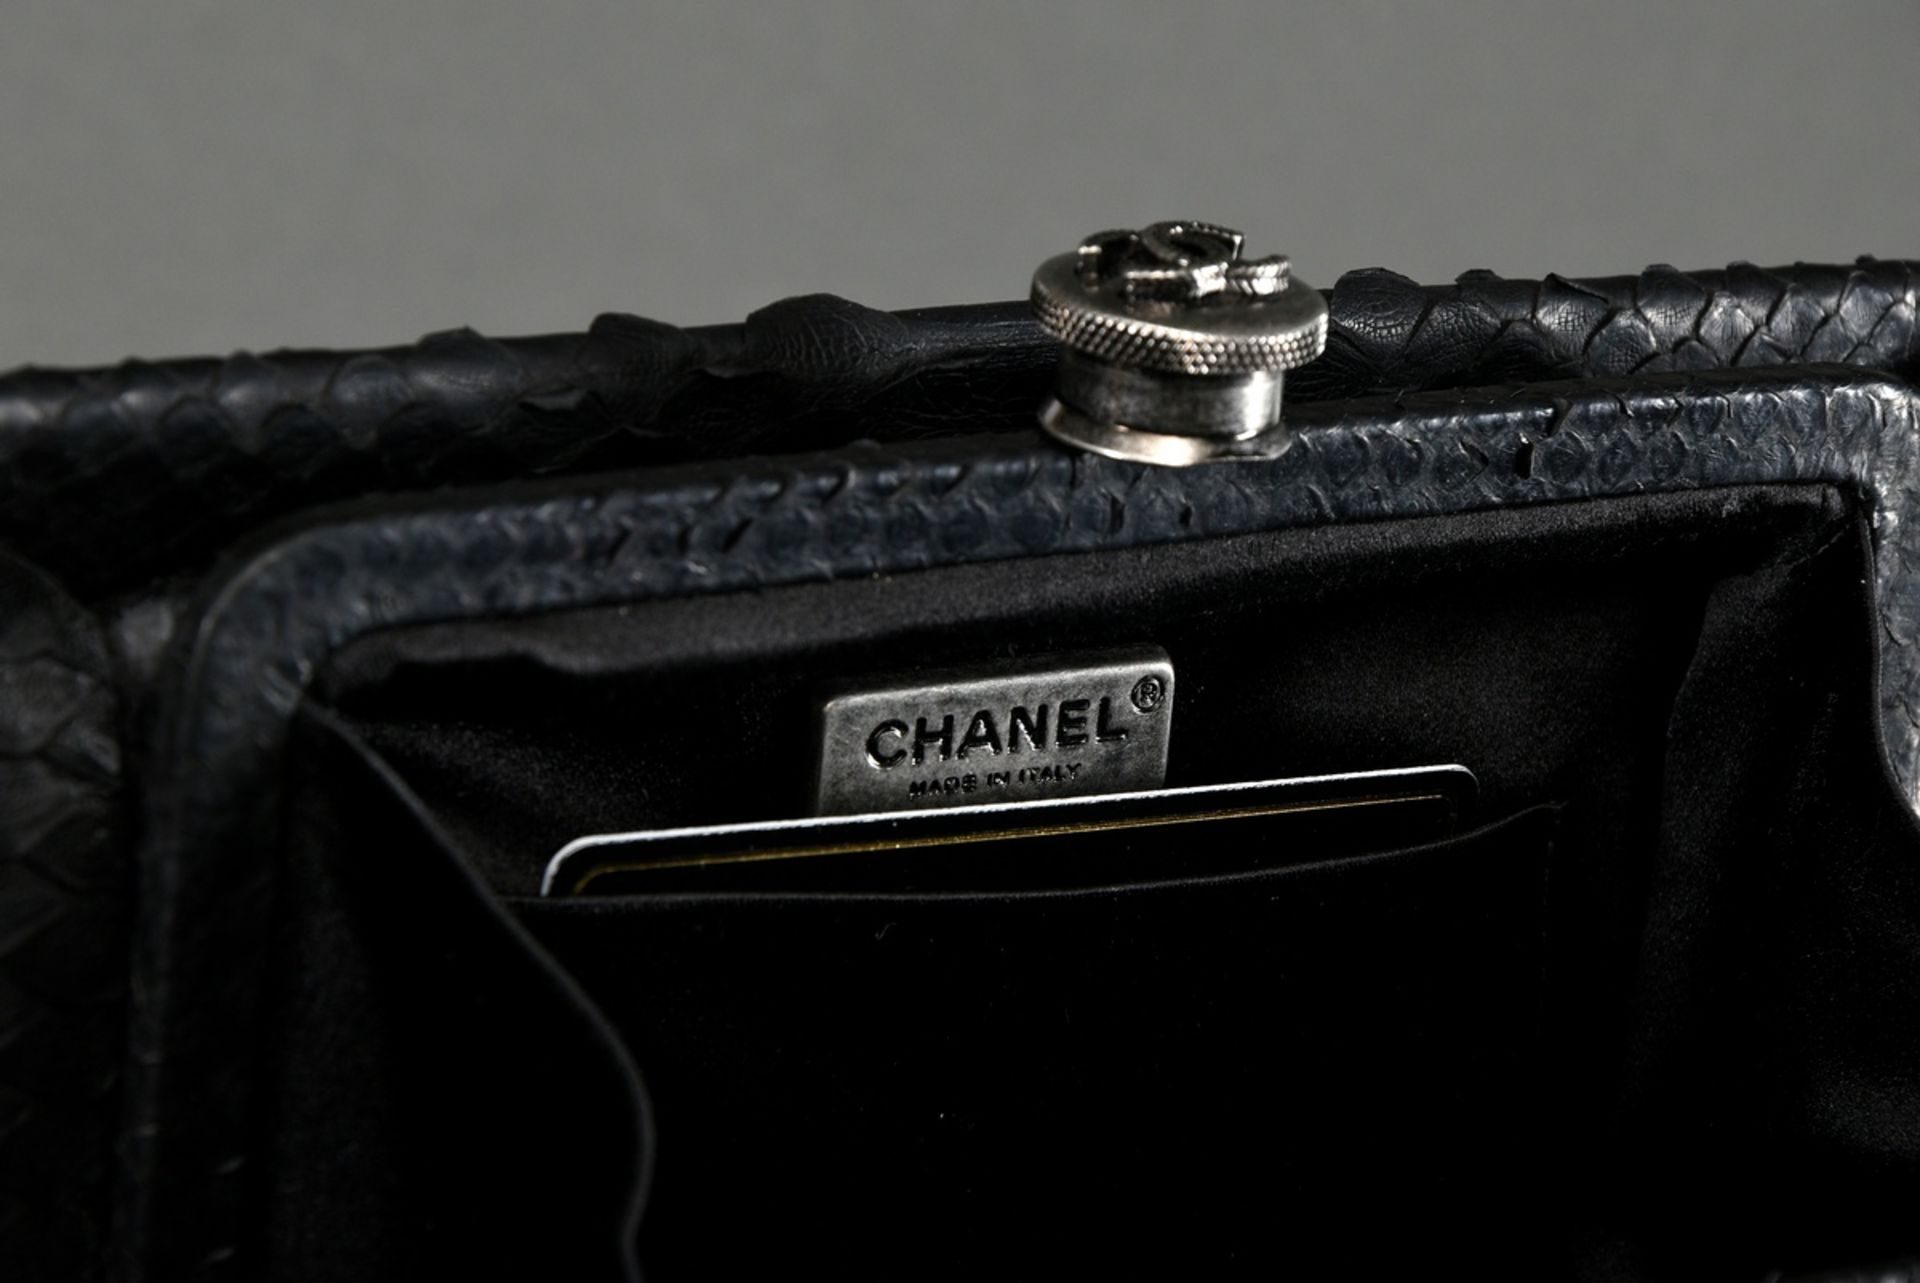 Chanel clutch in black python leather with silver metal logo clasp, black silk lining, Collection 2 - Image 4 of 5